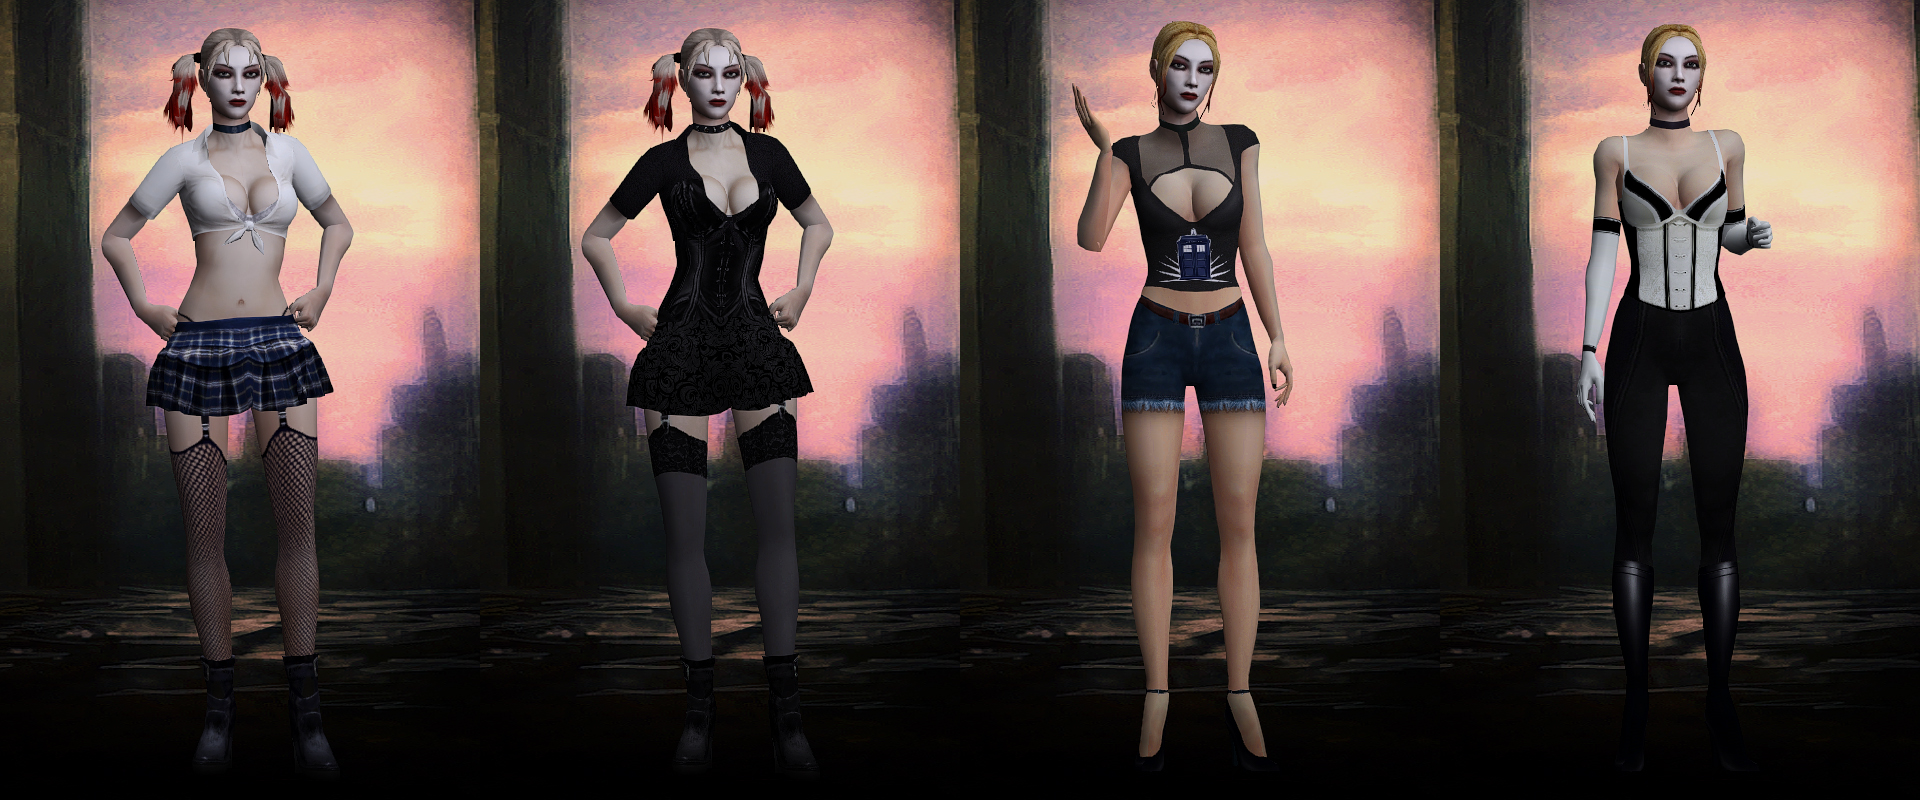 Vampire: The Masquerade -- Bloodlines 6.7 patch released - Neoseeker